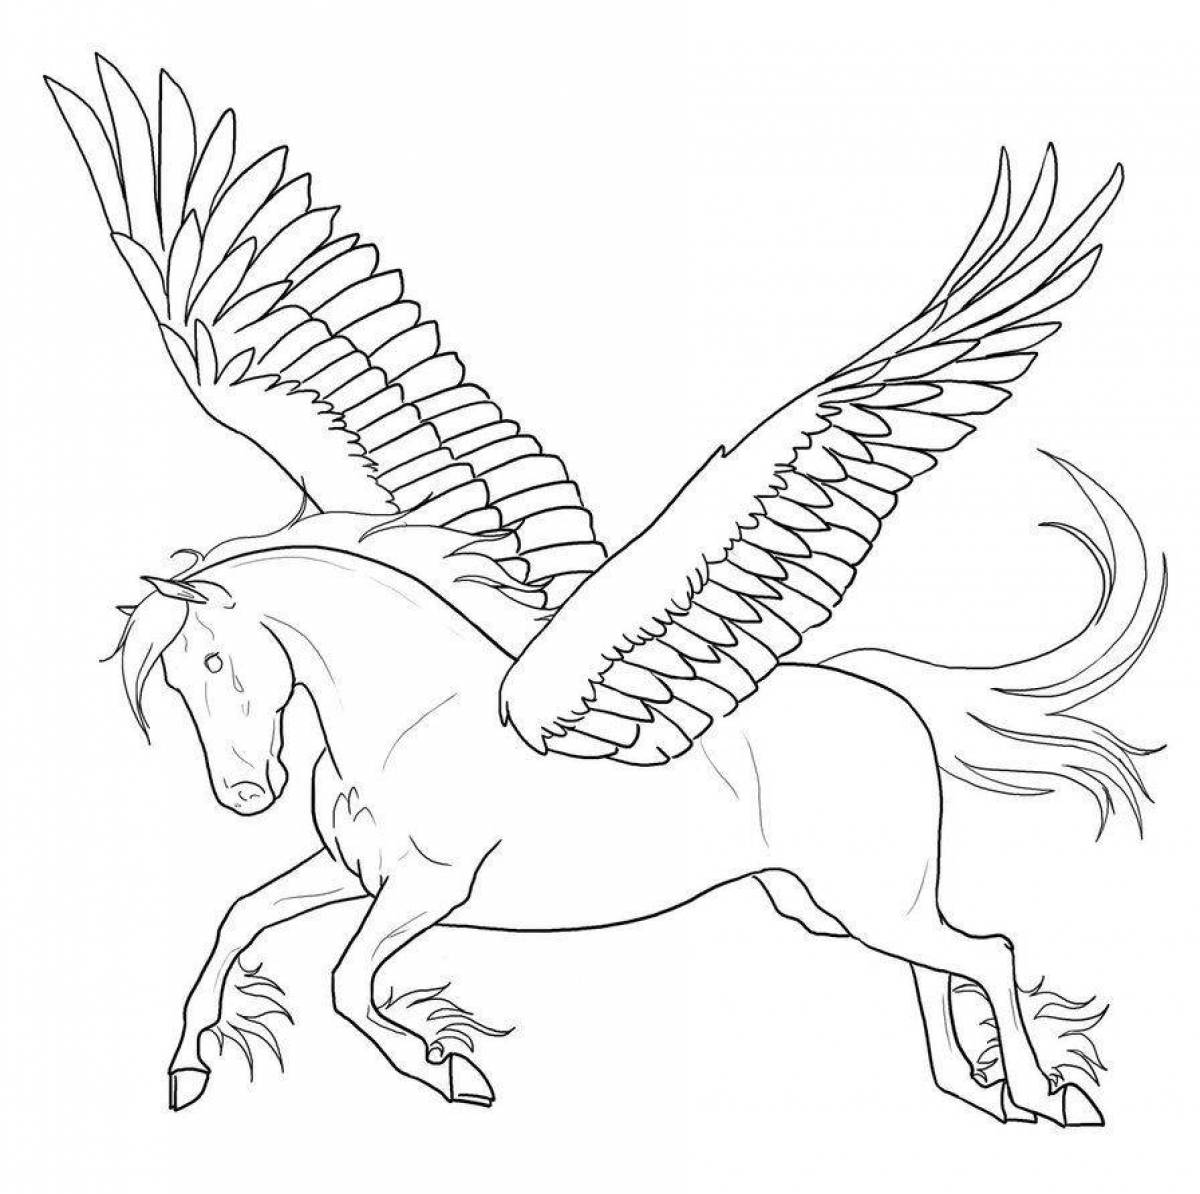 Unicorn with wings #3